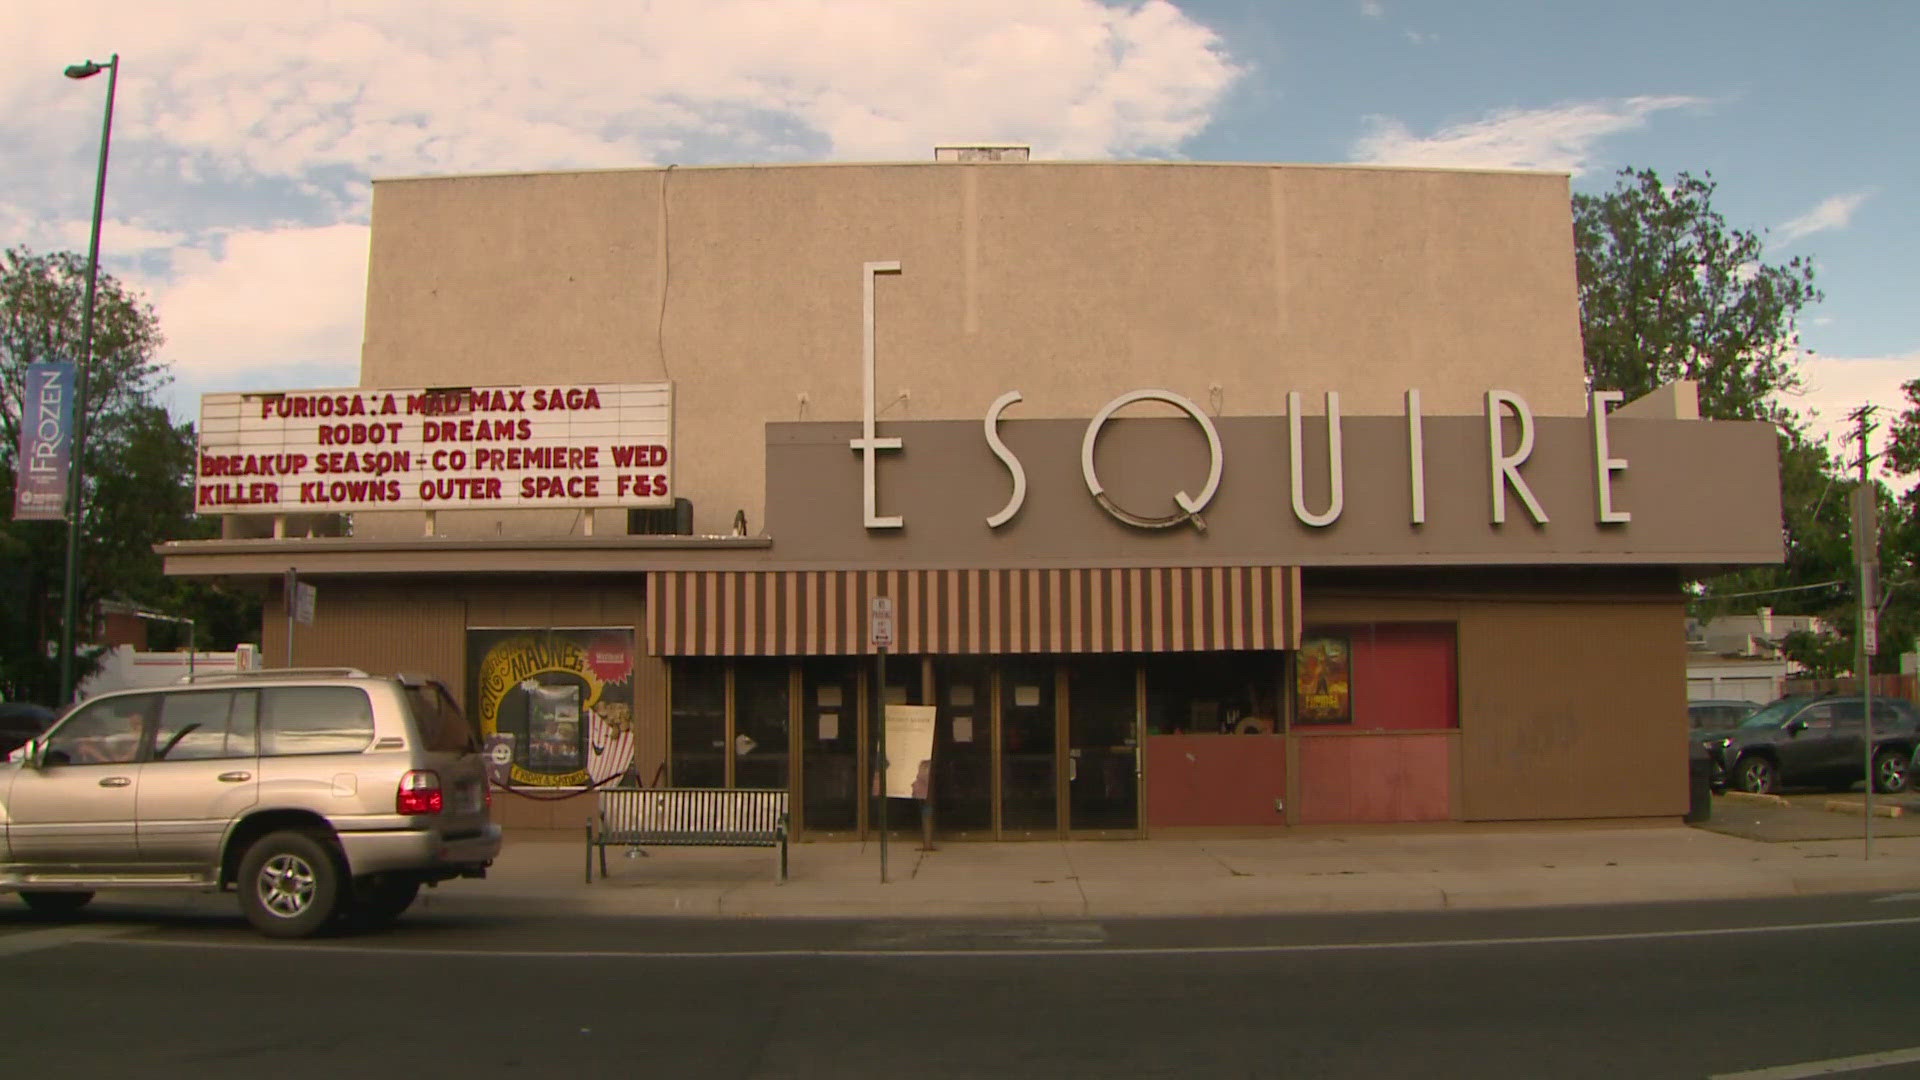 After 97 years of showing films, the Esquire Theater closes the curtains, but not before premiering one last film.